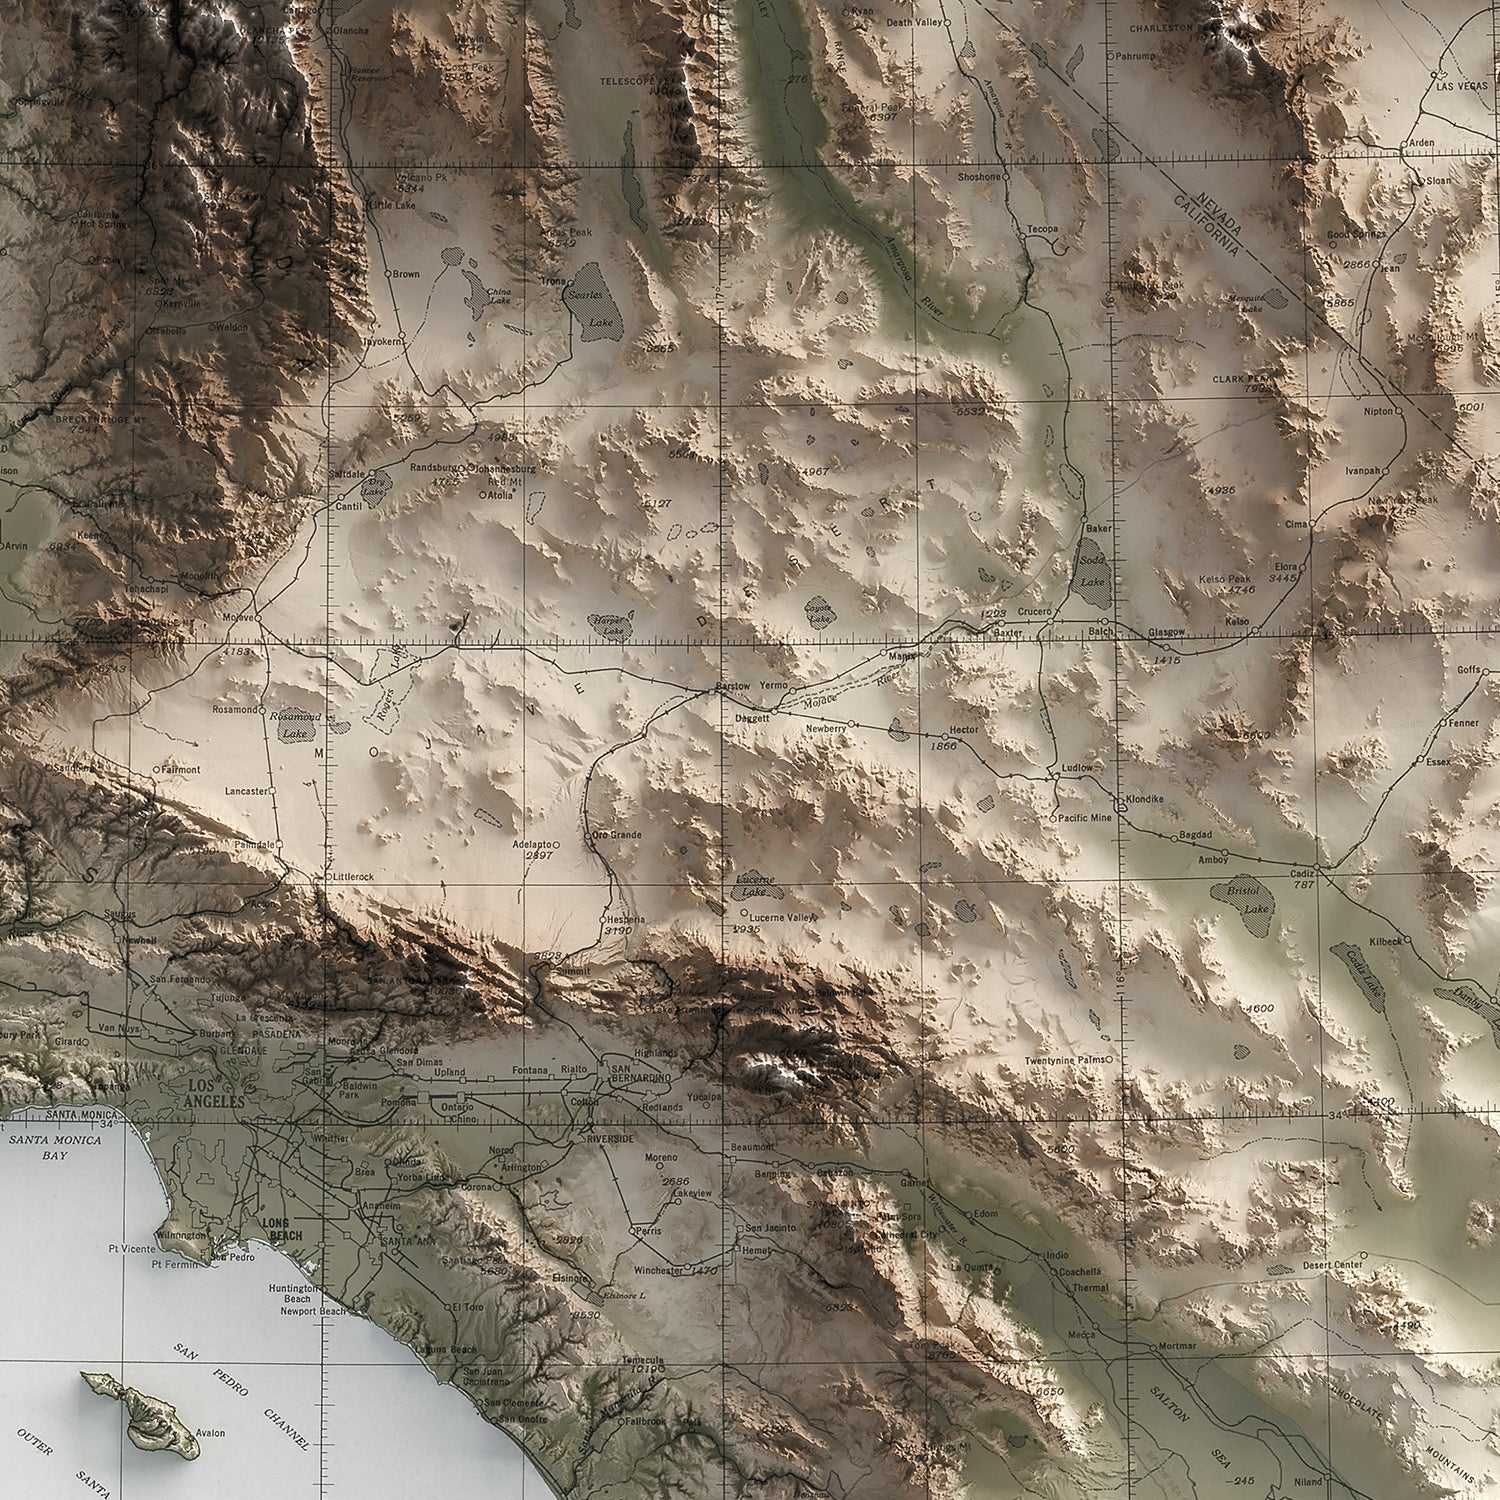 Southern California and Surrounding Region - Vintage Shaded Relief Map (1941)